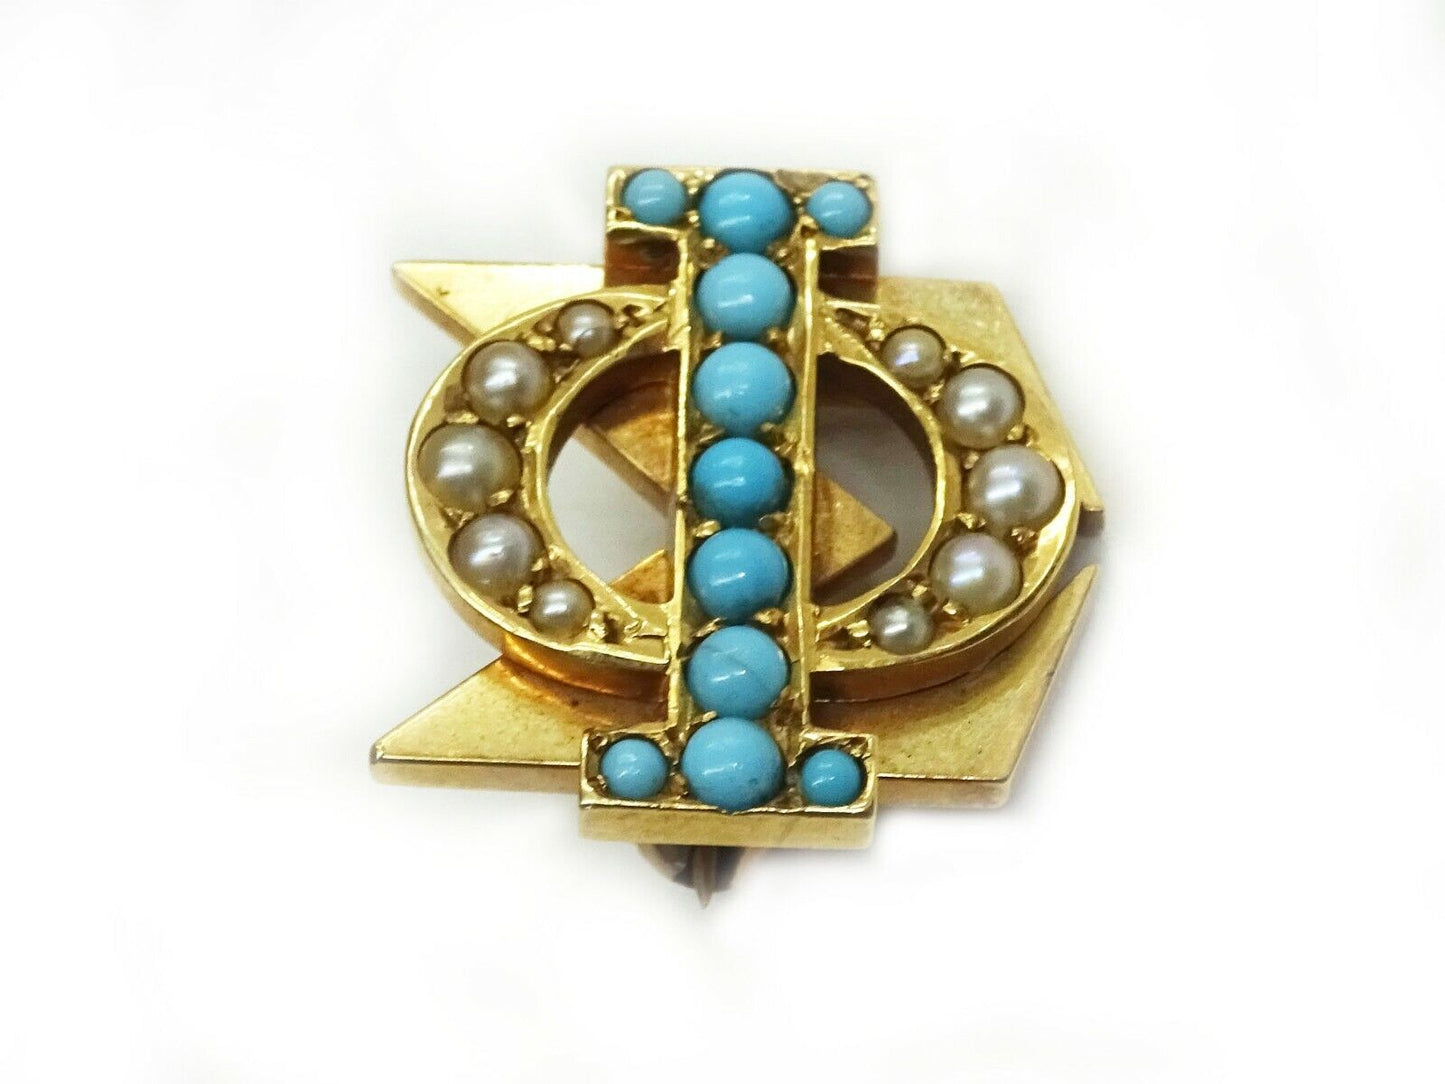 Antique 1911 Phi Sigma Fraternity/Sorority Pin 14k Gold Seed Pearls & Turquoise